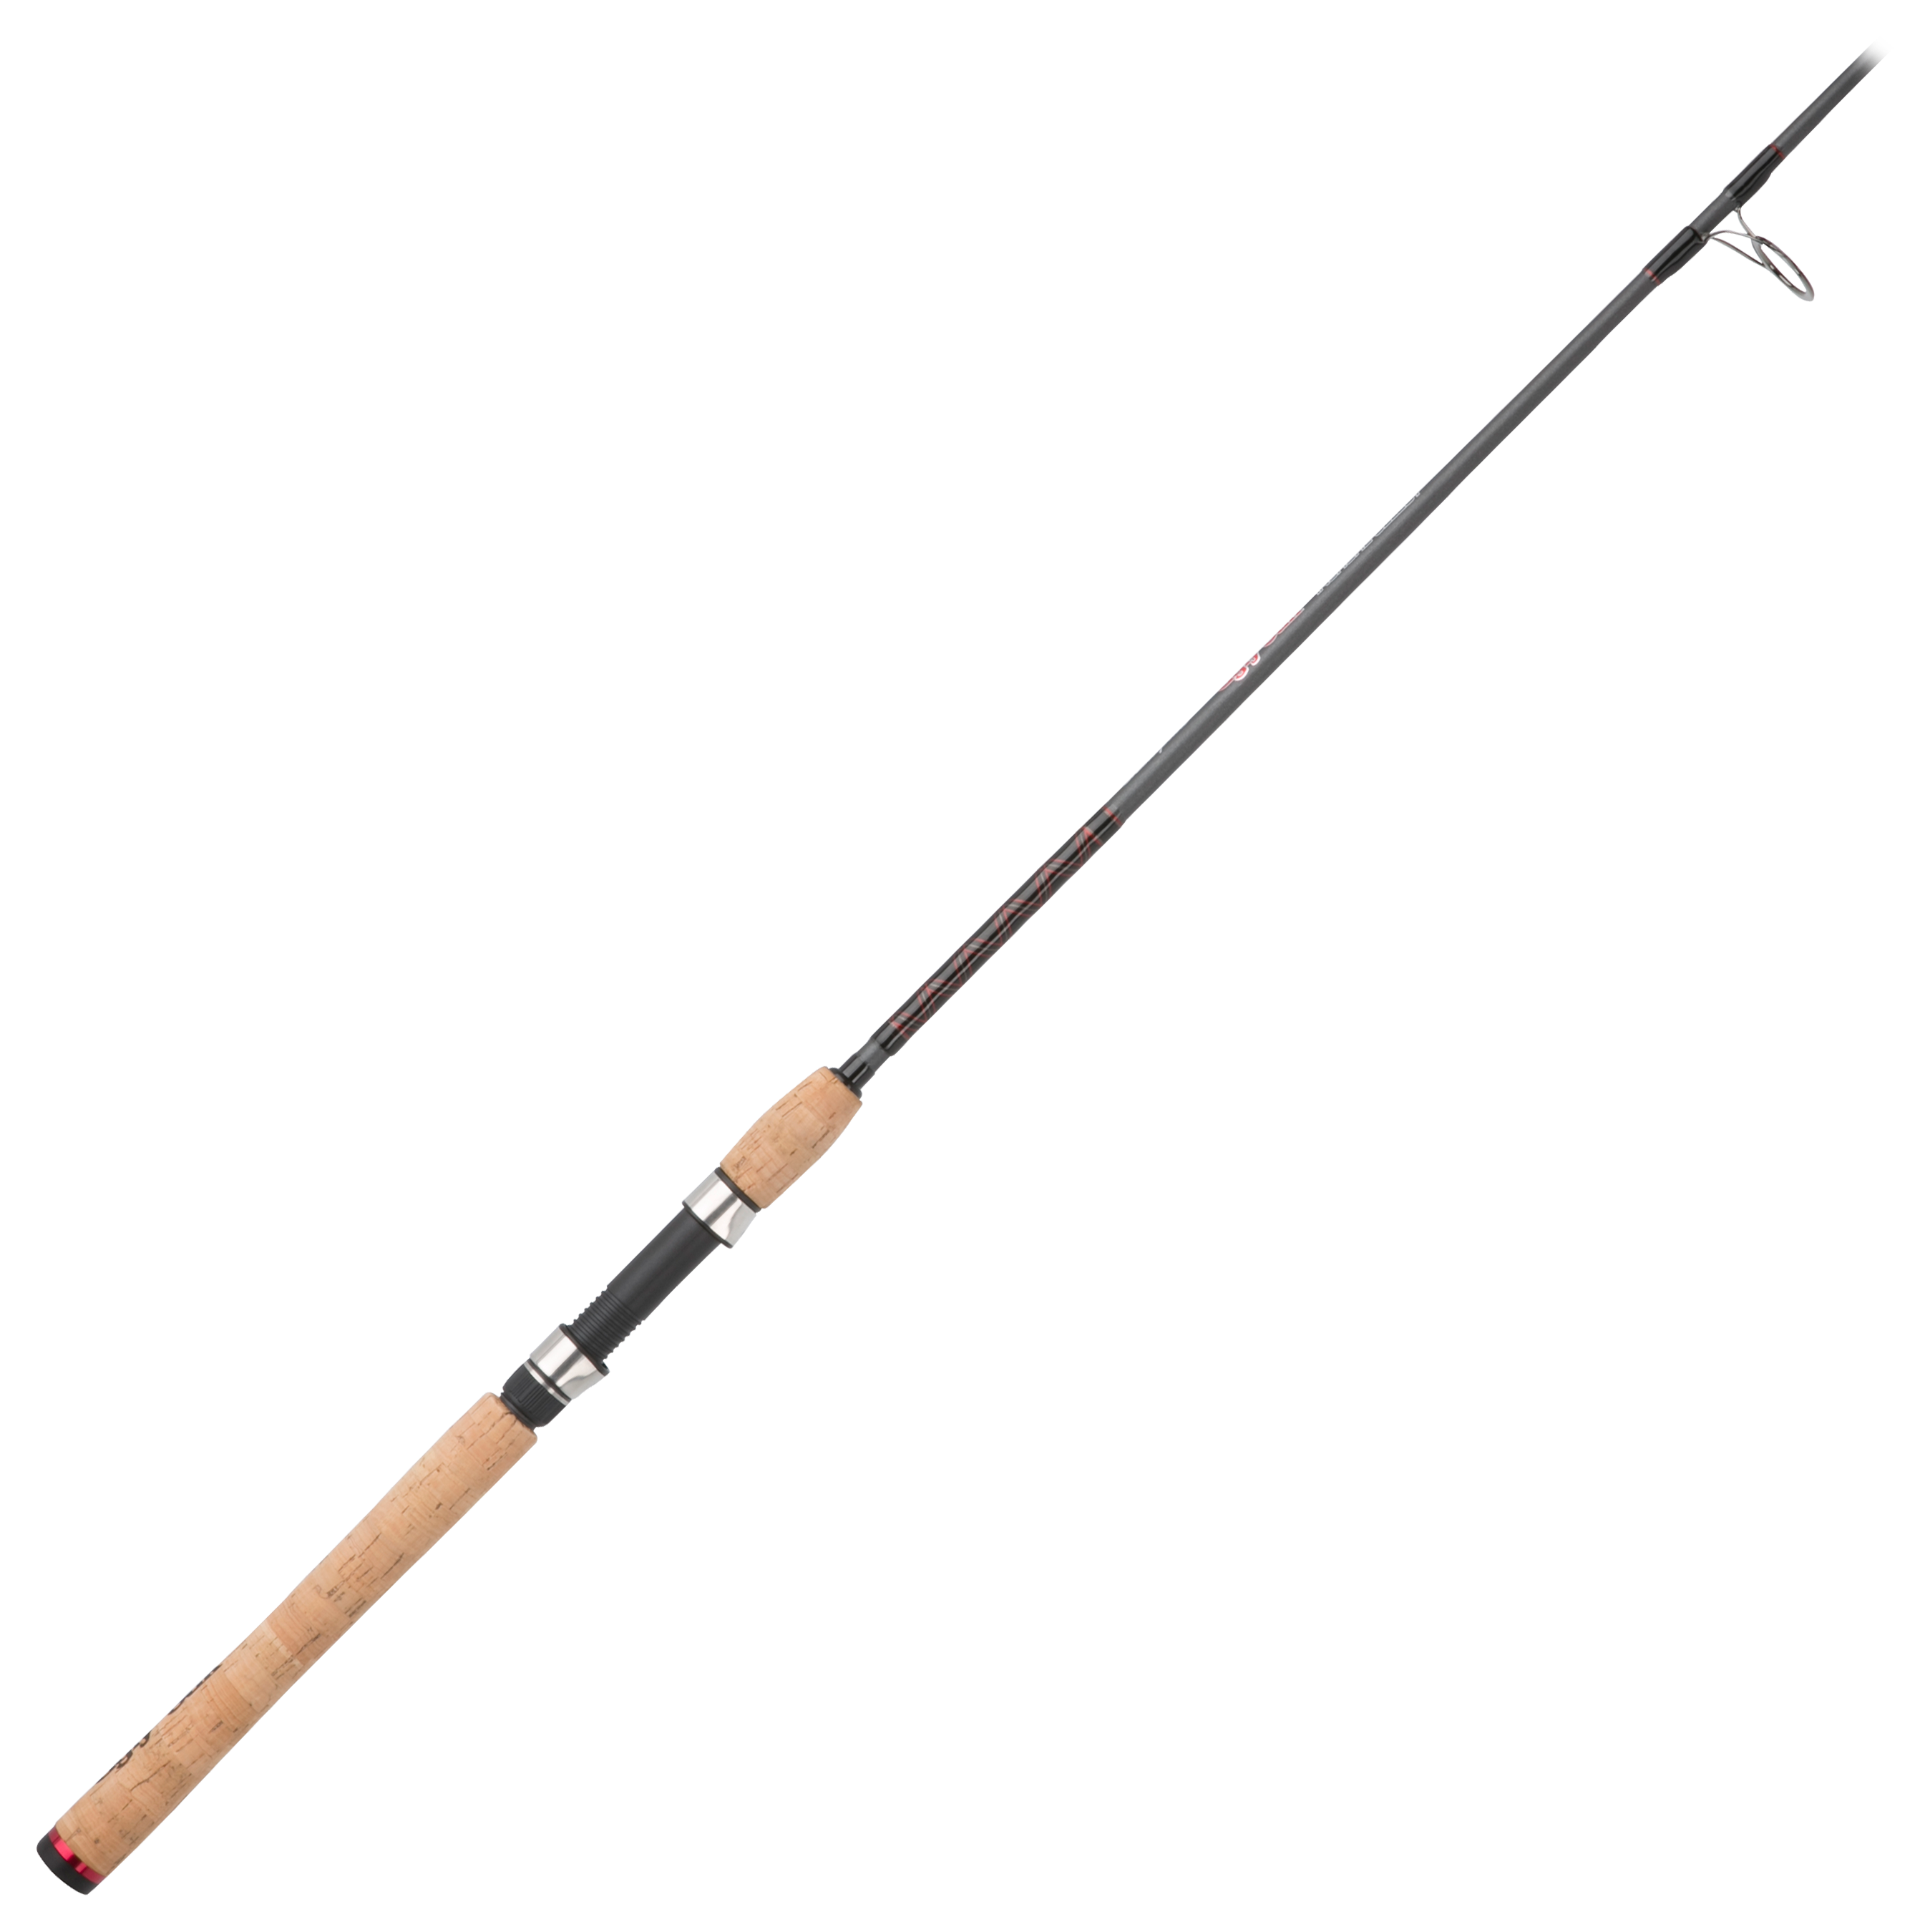 Offshore Angler Inshore Extreme Spinning Rod - ISES761017